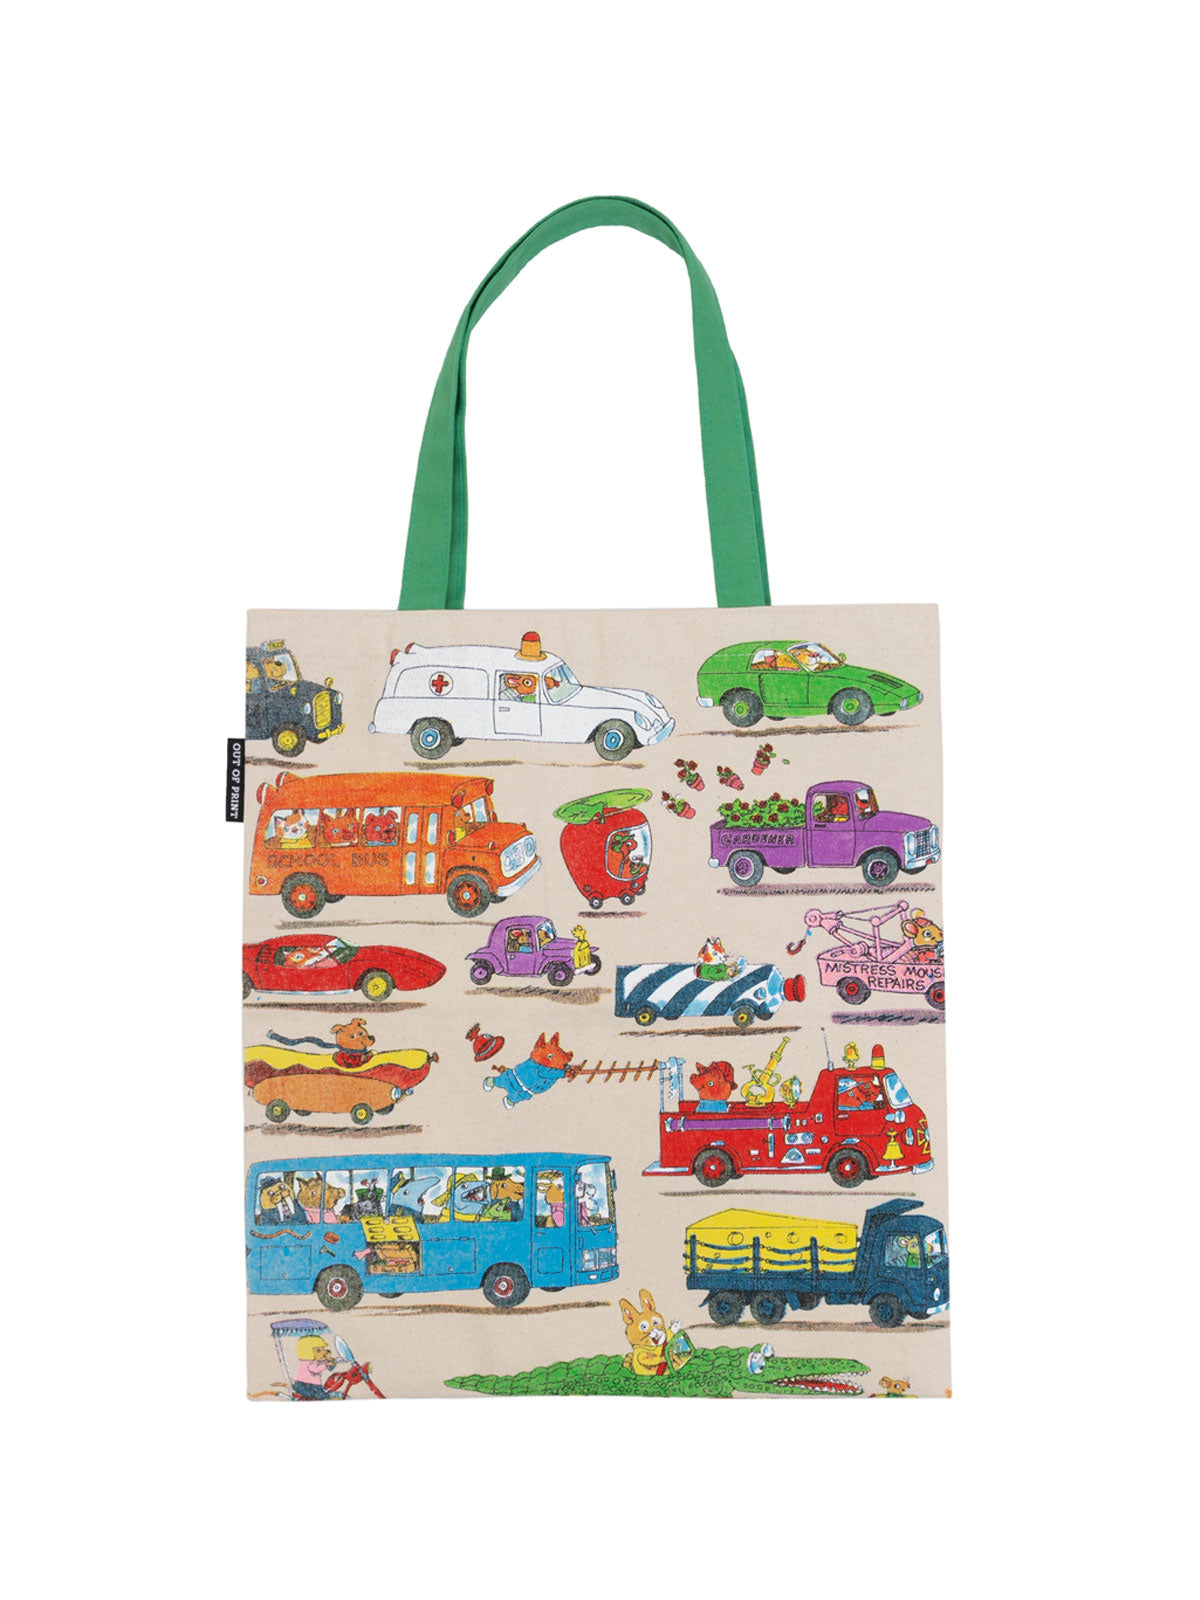 "Cars and Trucks and Things That Go" Richard Scarry Tote Bag